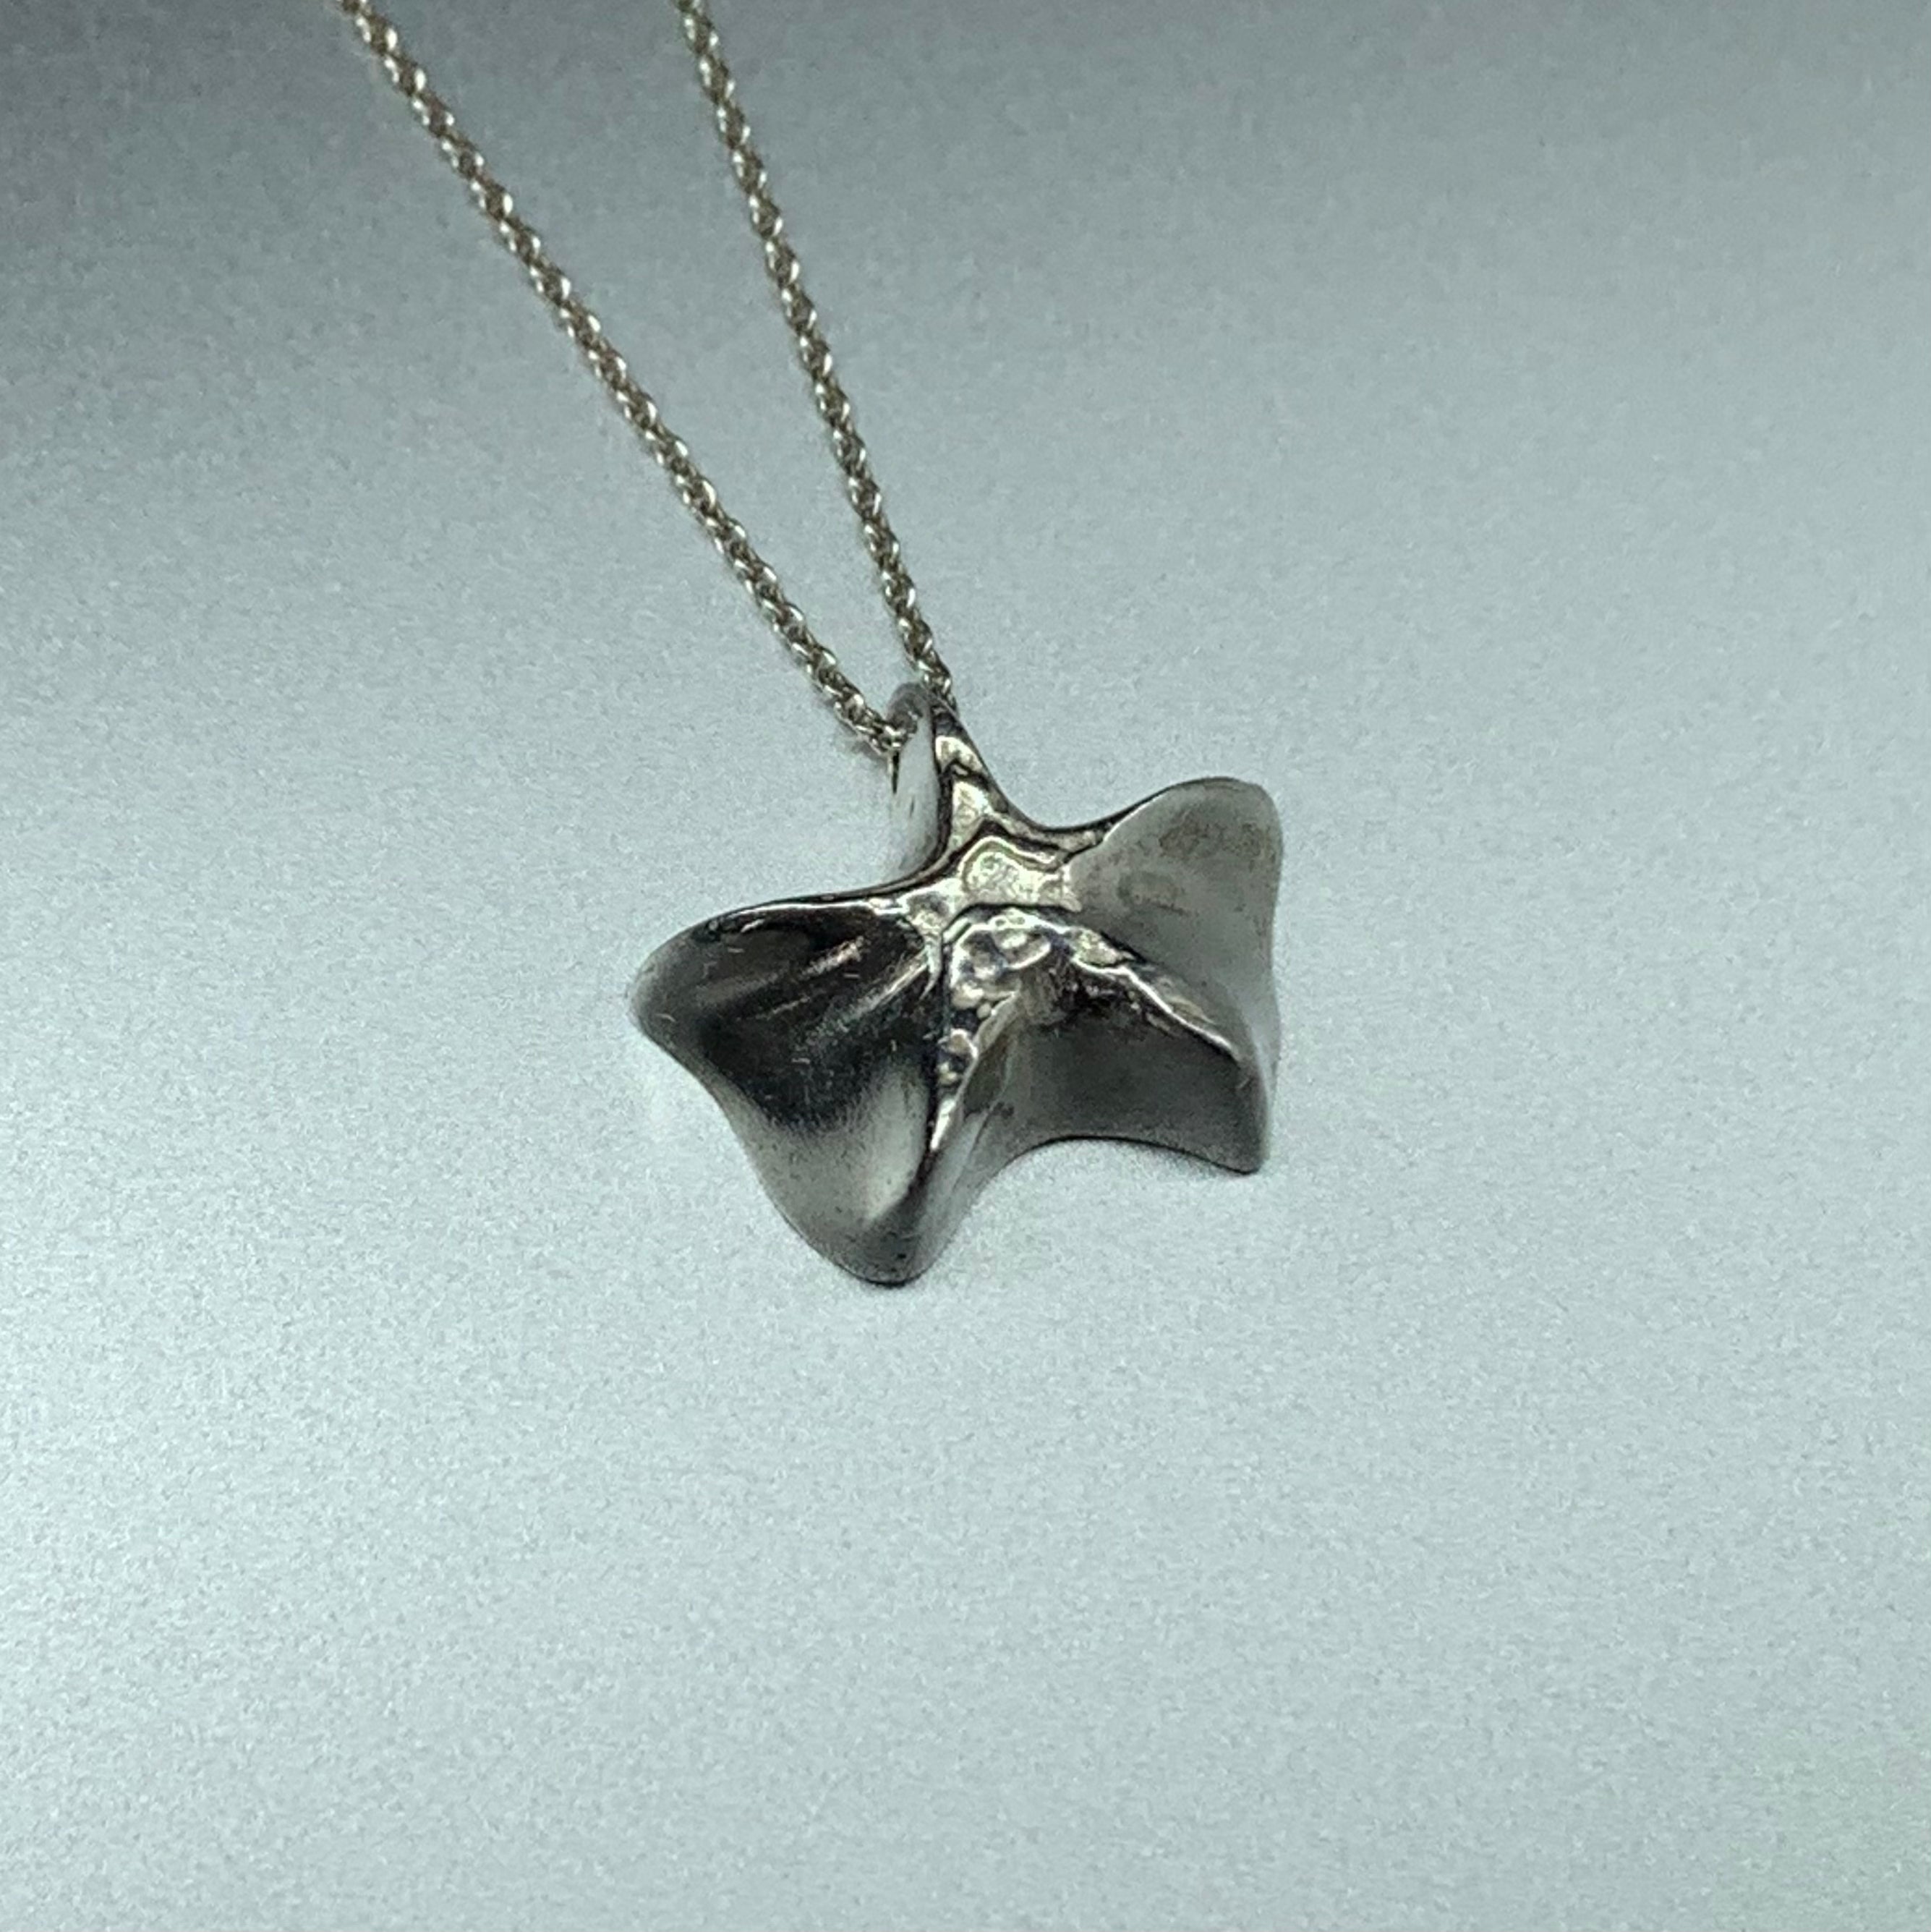 Starboy Necklace